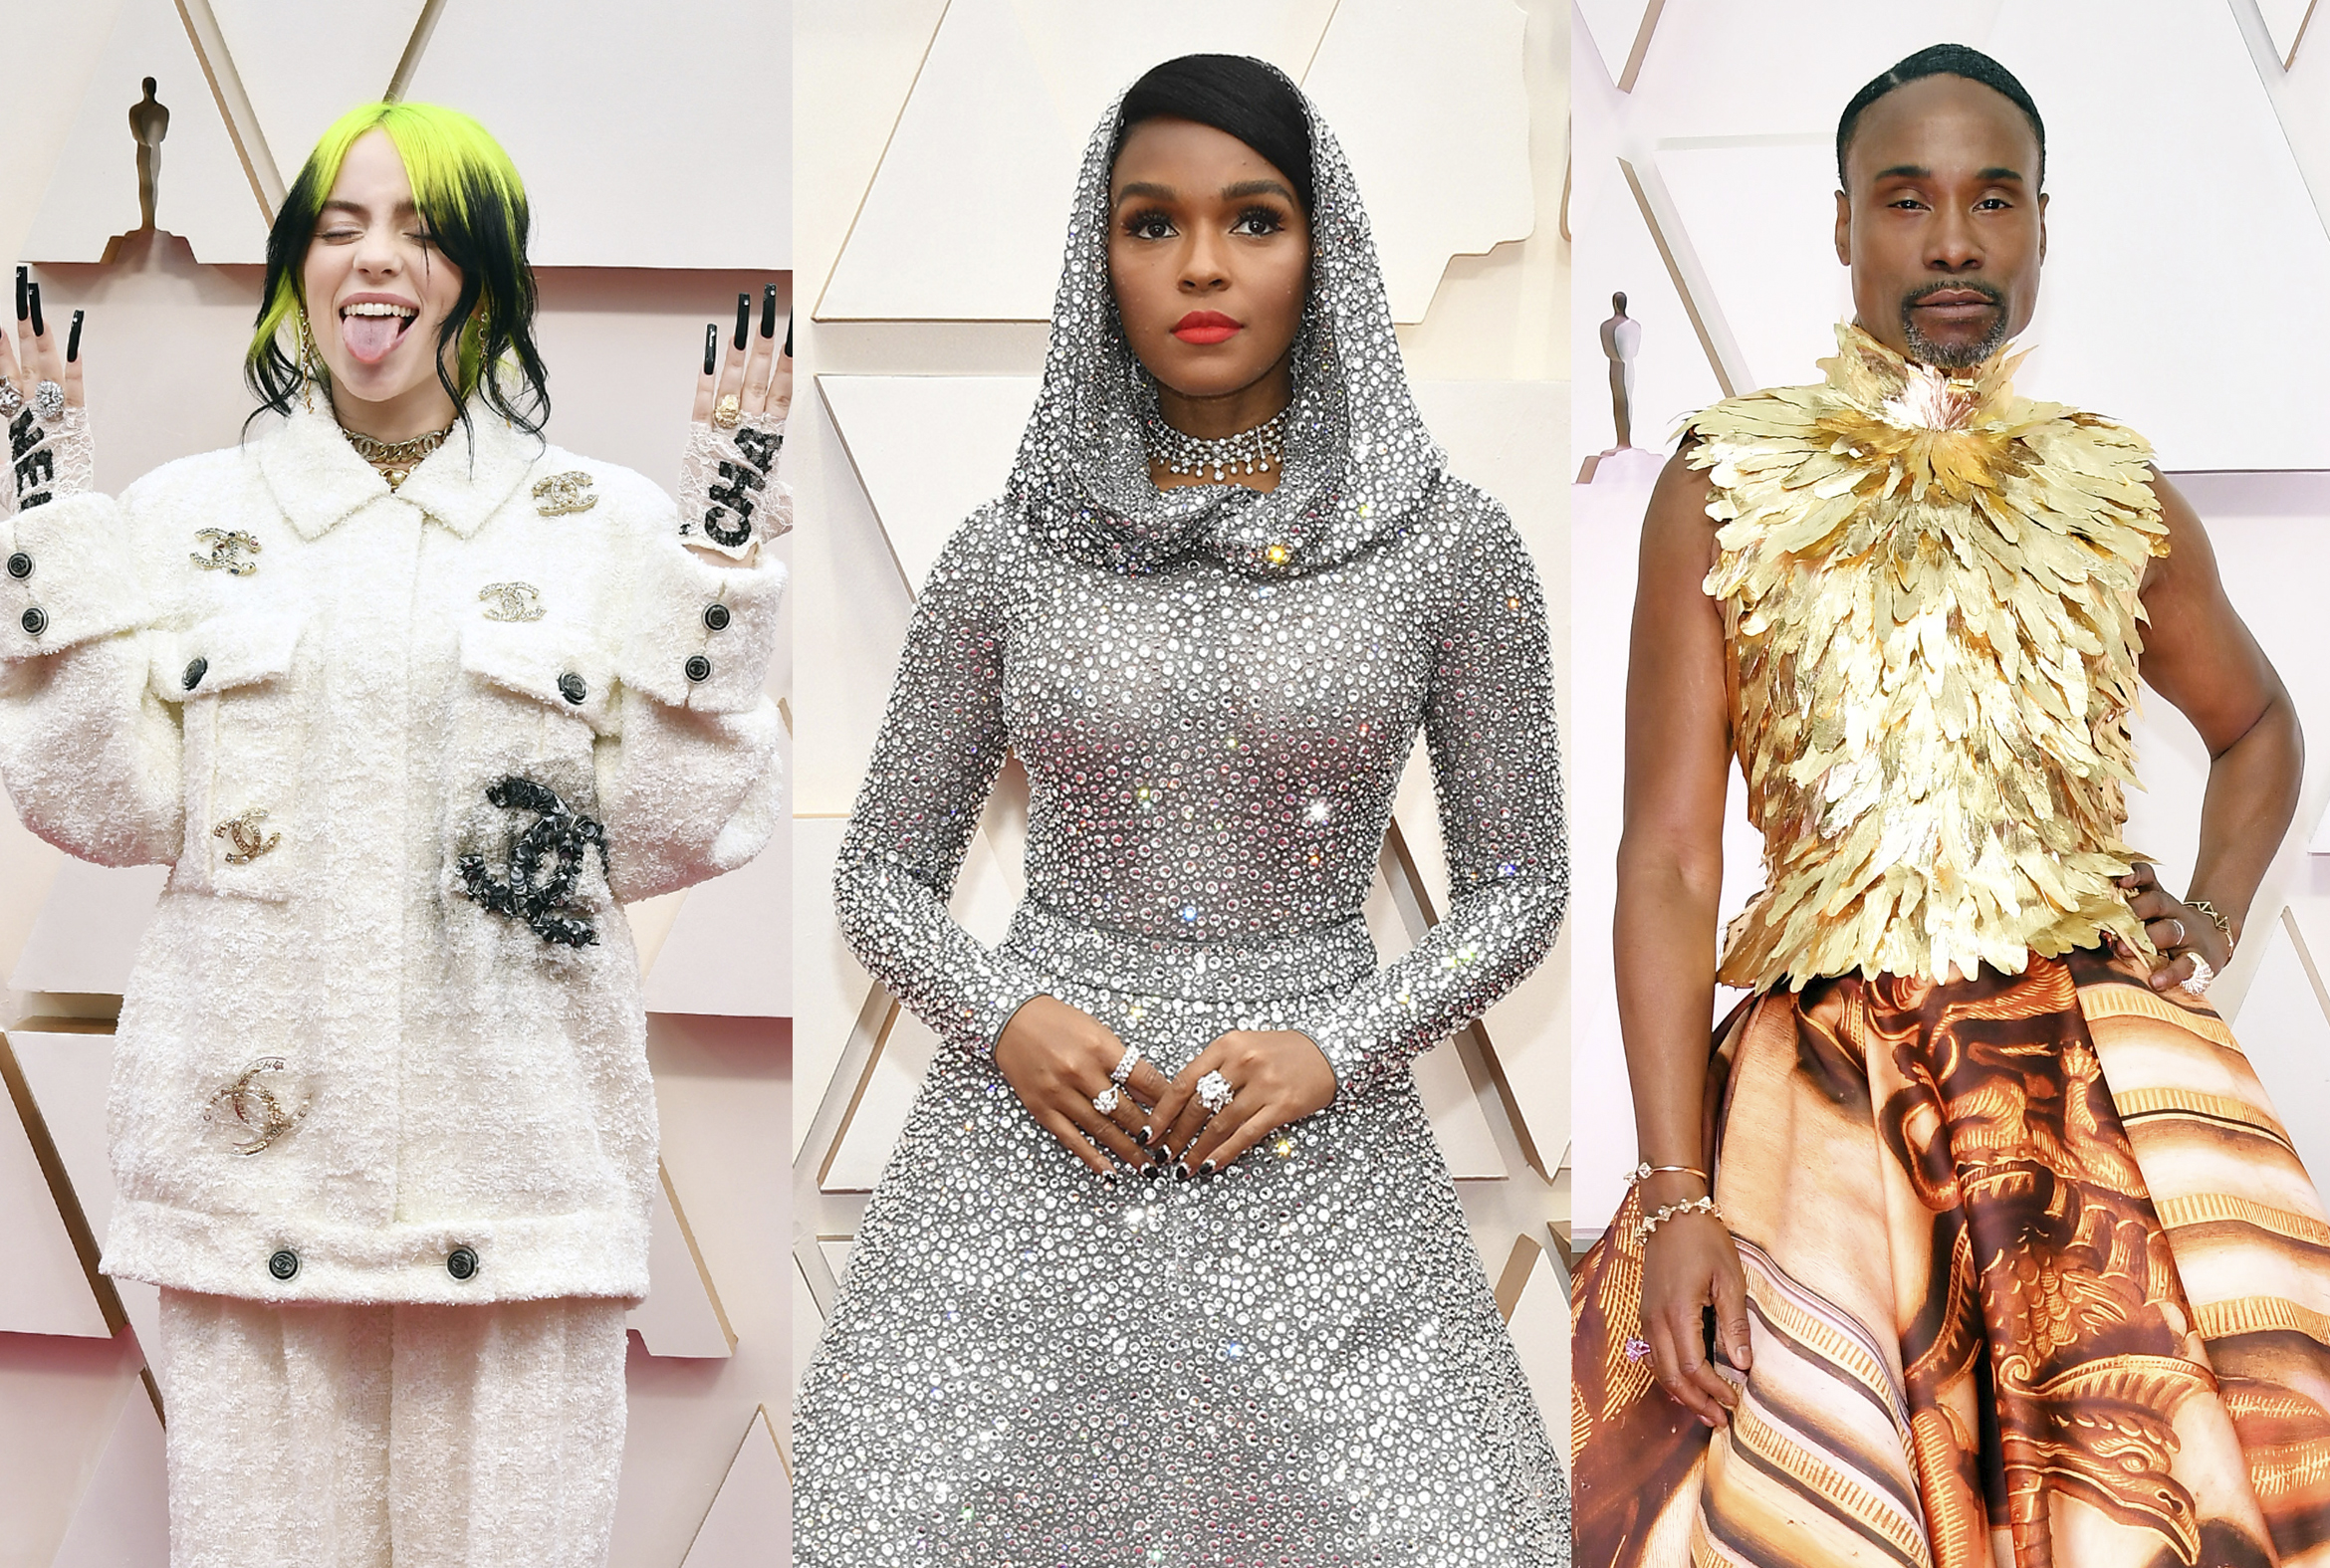 Oscars 2020: The Best and Worst Dressed Stars on the 92nd Academy Awards Red Carpet